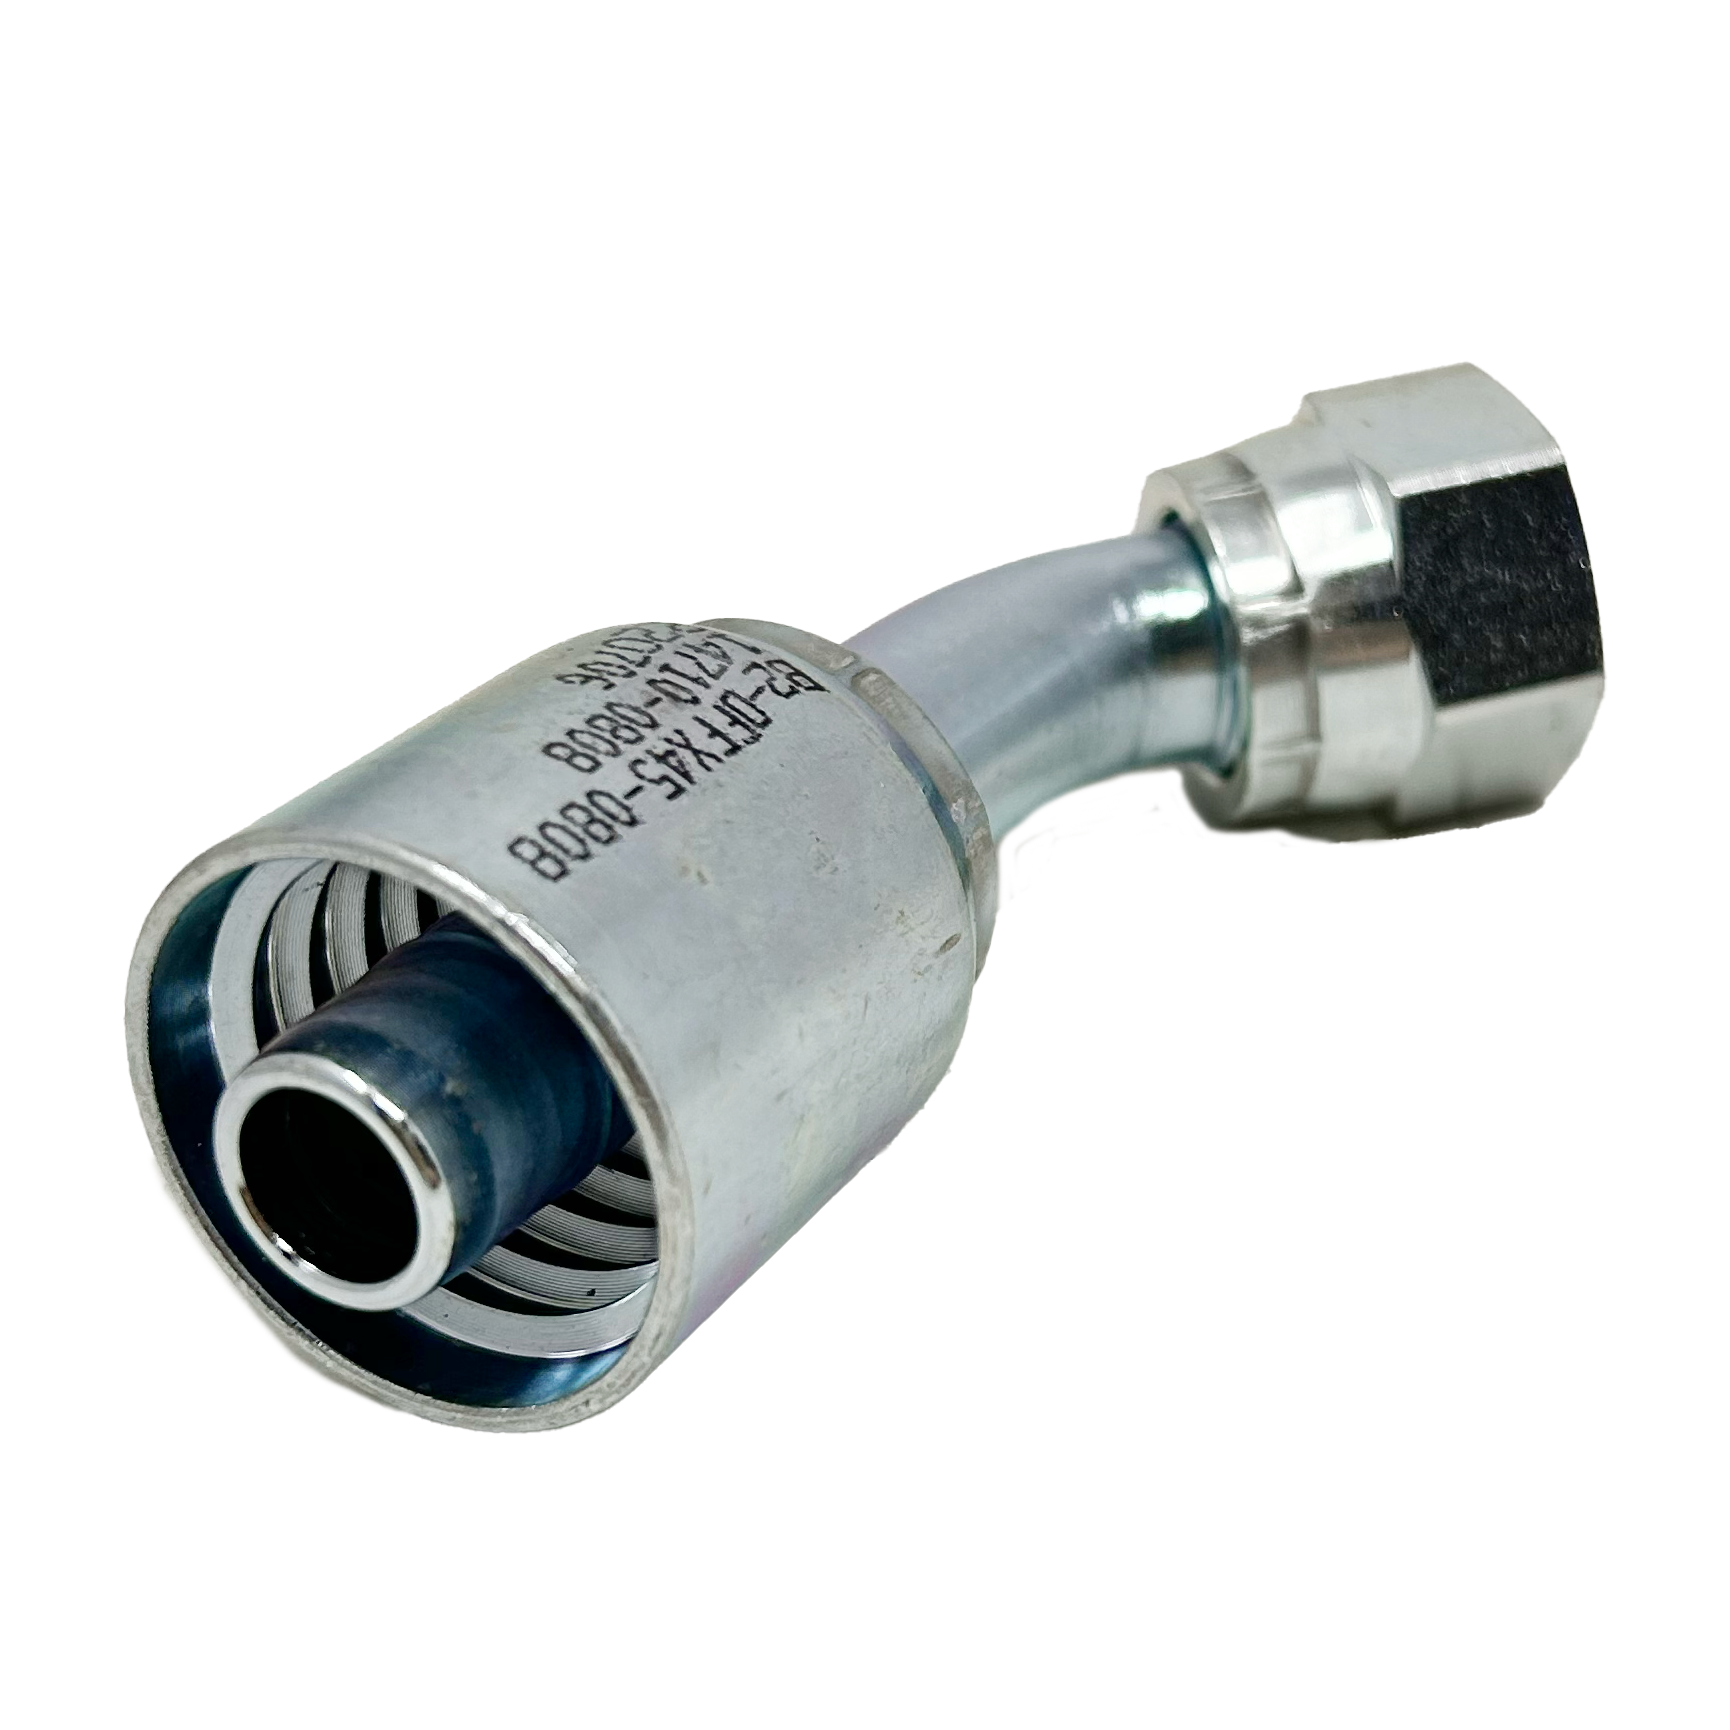 B2-OFFX45-0810: Continental Hose Fitting, 0.5 (1/2") Hose ID x 1-14 Female ORFS, 45-Degree Swivel Connection